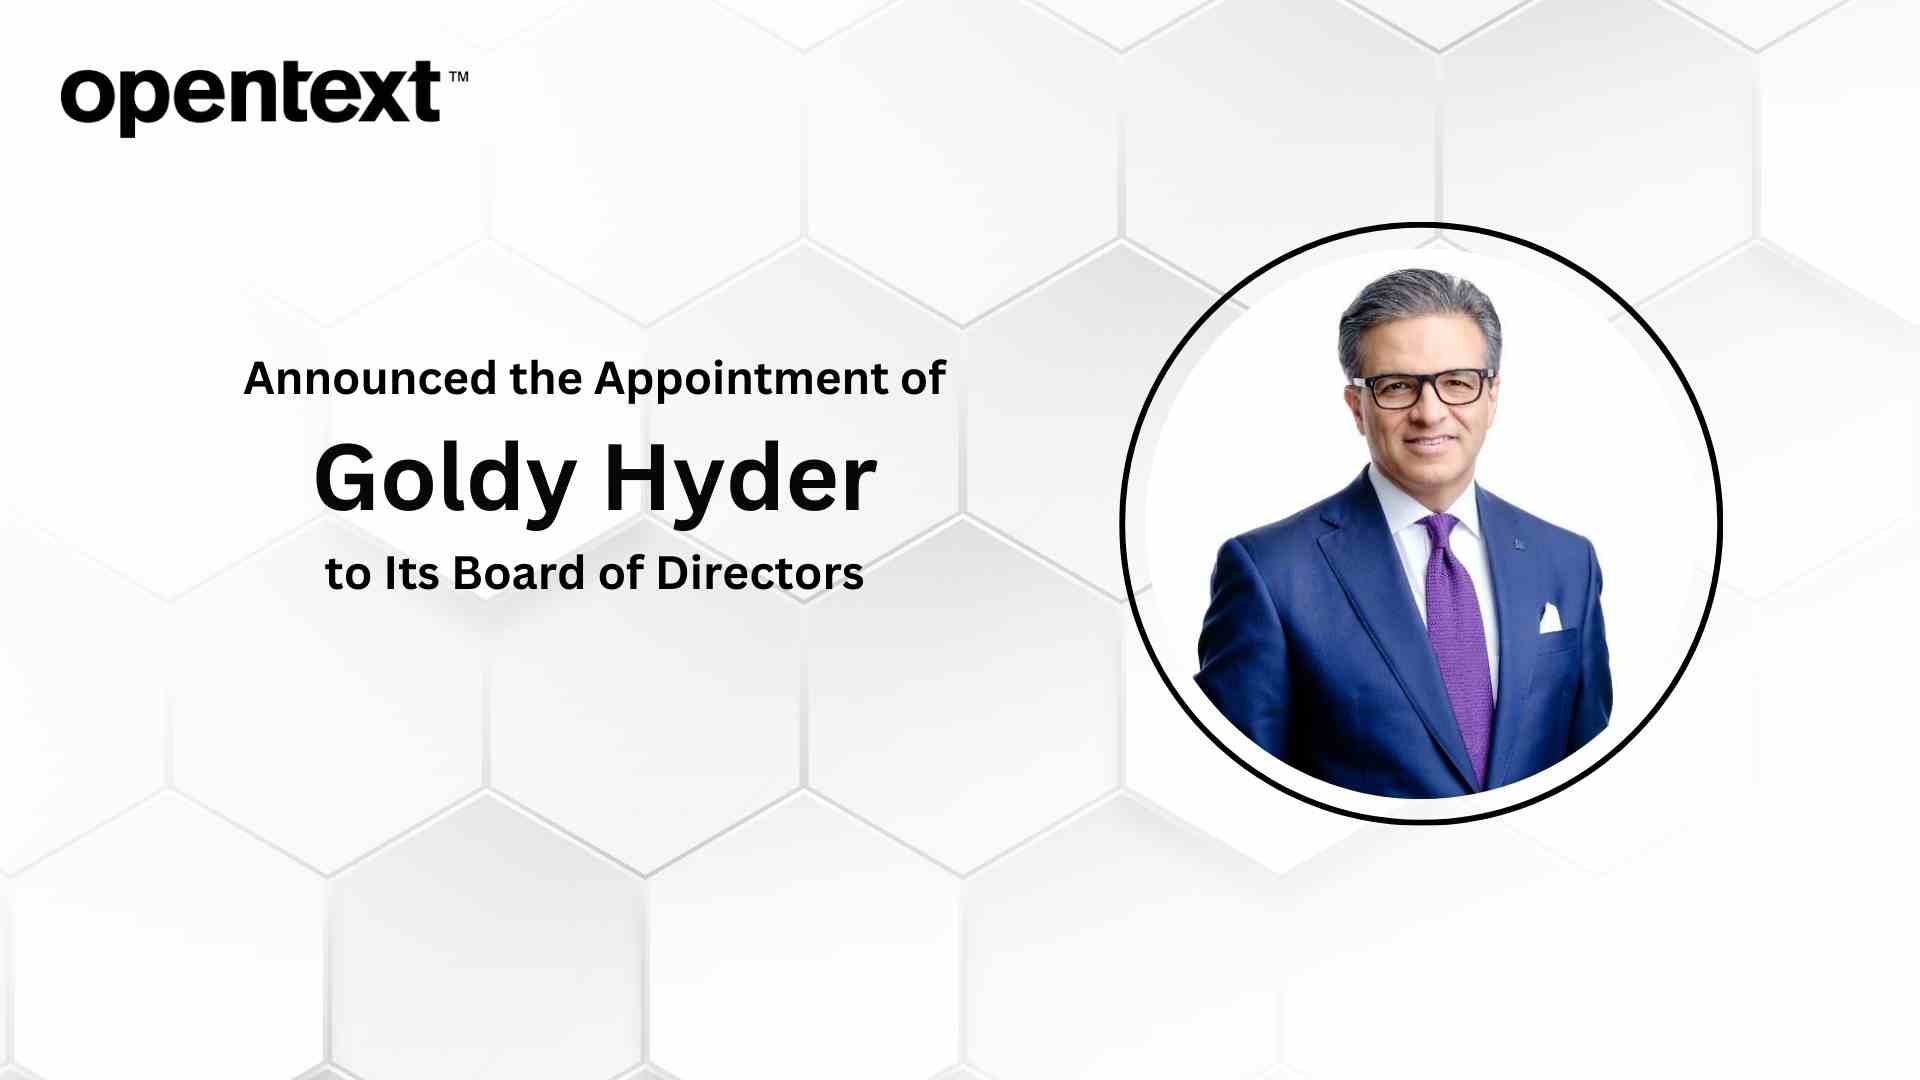 OpenText Appoints Goldy Hyder to Board of Directors